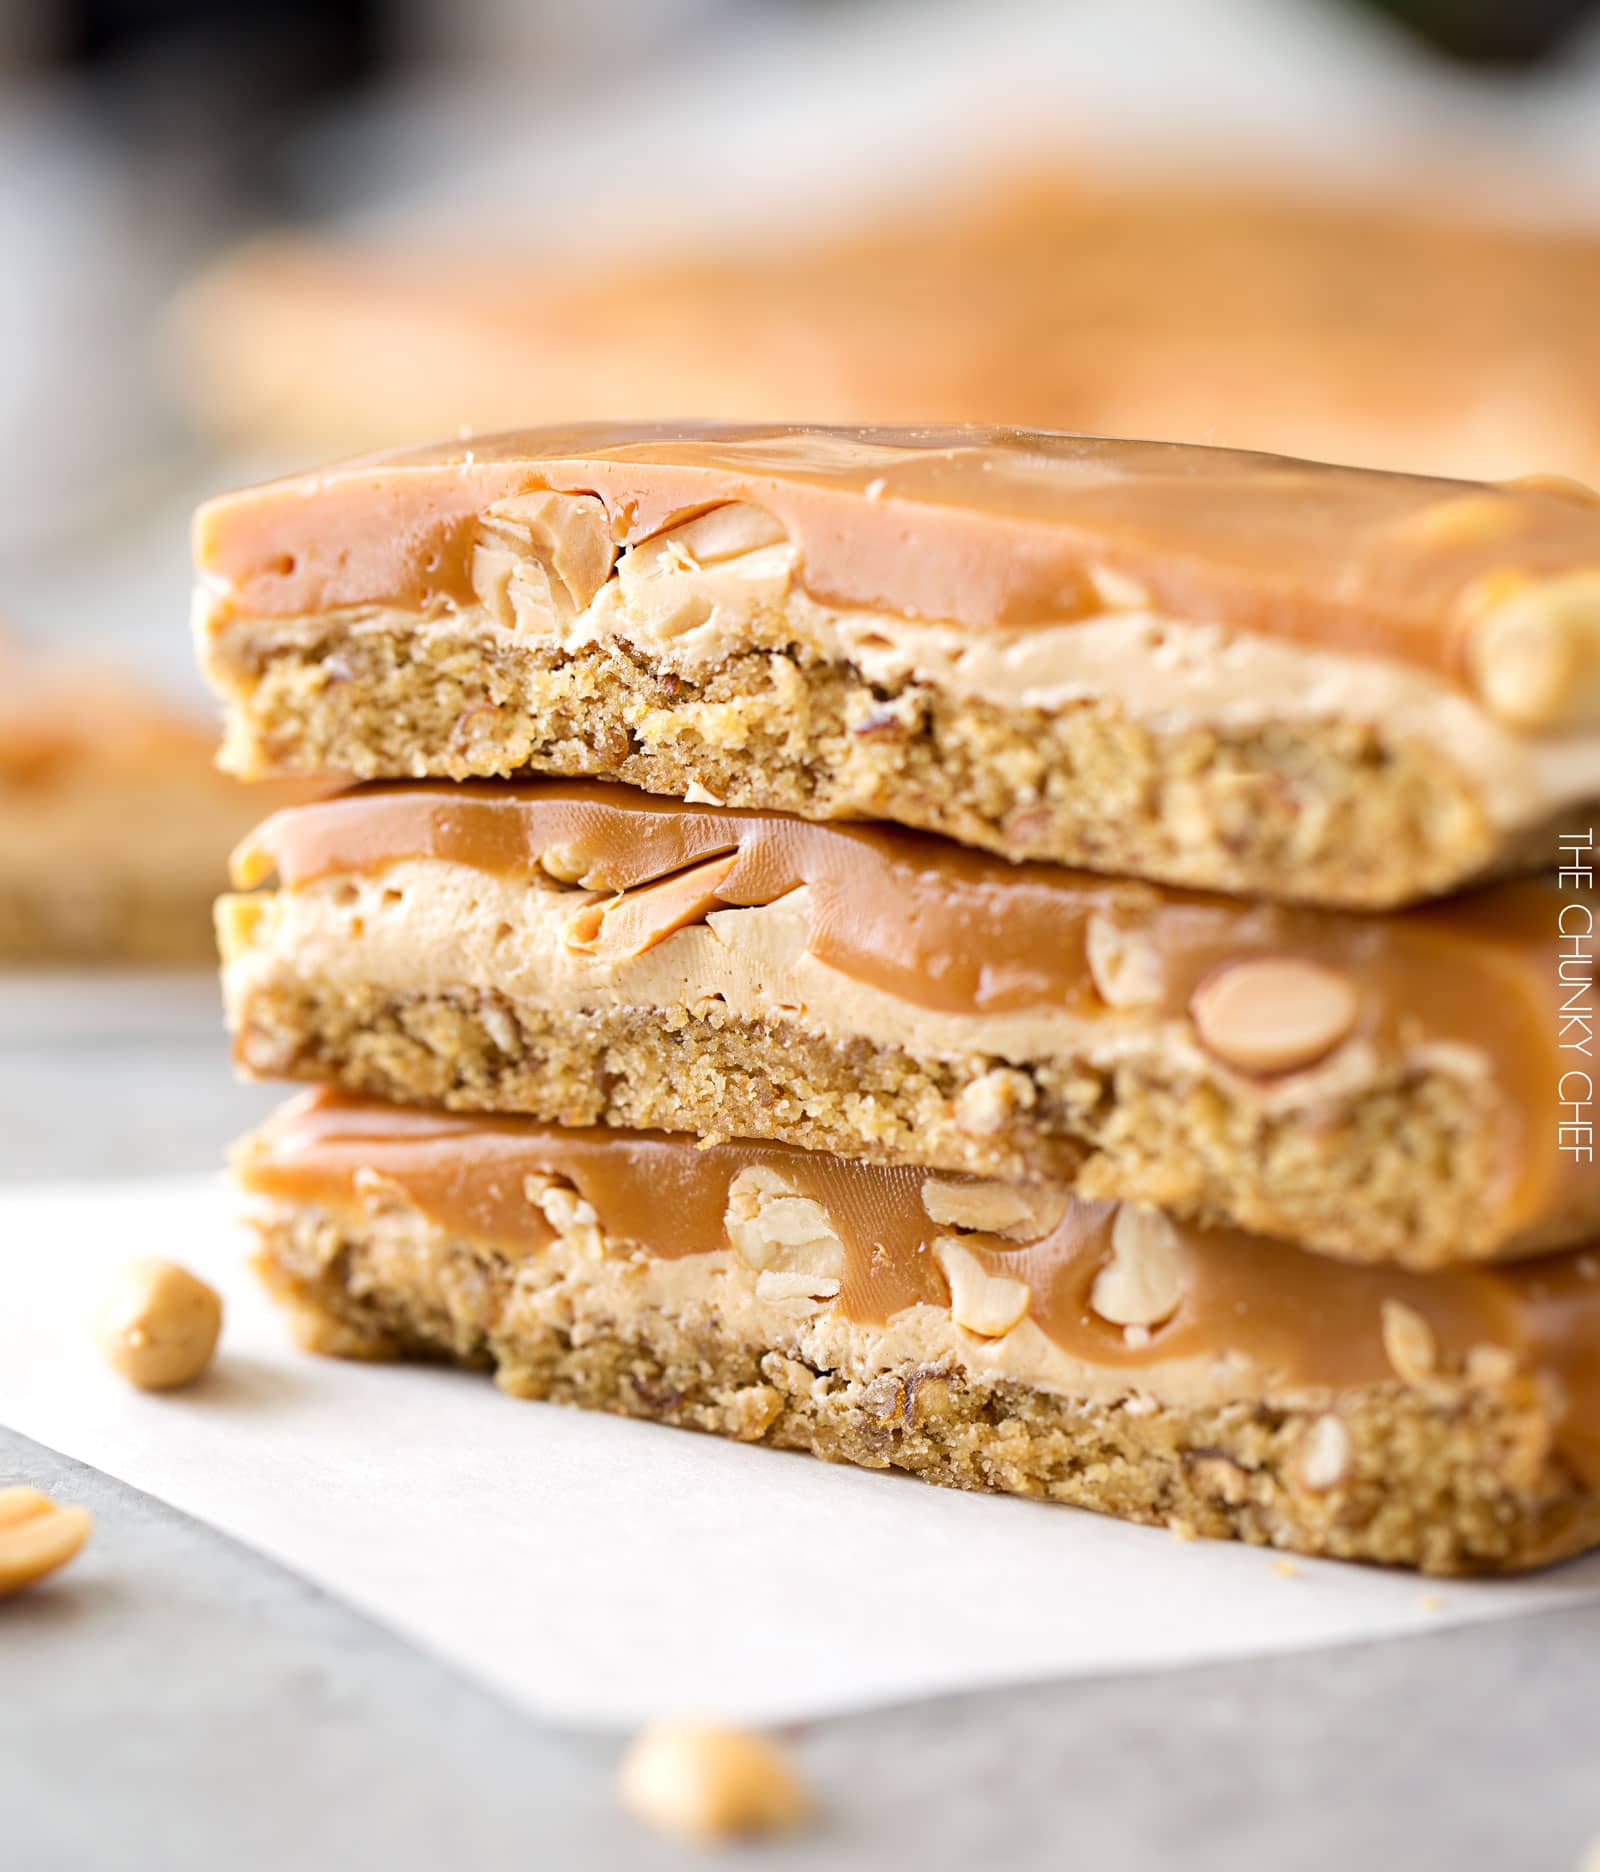 Salted Caramel Peanut Bars | These easy to make bars taste like a great candy bar! A soft pretzel flavored base is covered with a creamy nougat layer, sprinkled with peanuts, and coated in dreamy salted caramel! | http://thechunkychef.com